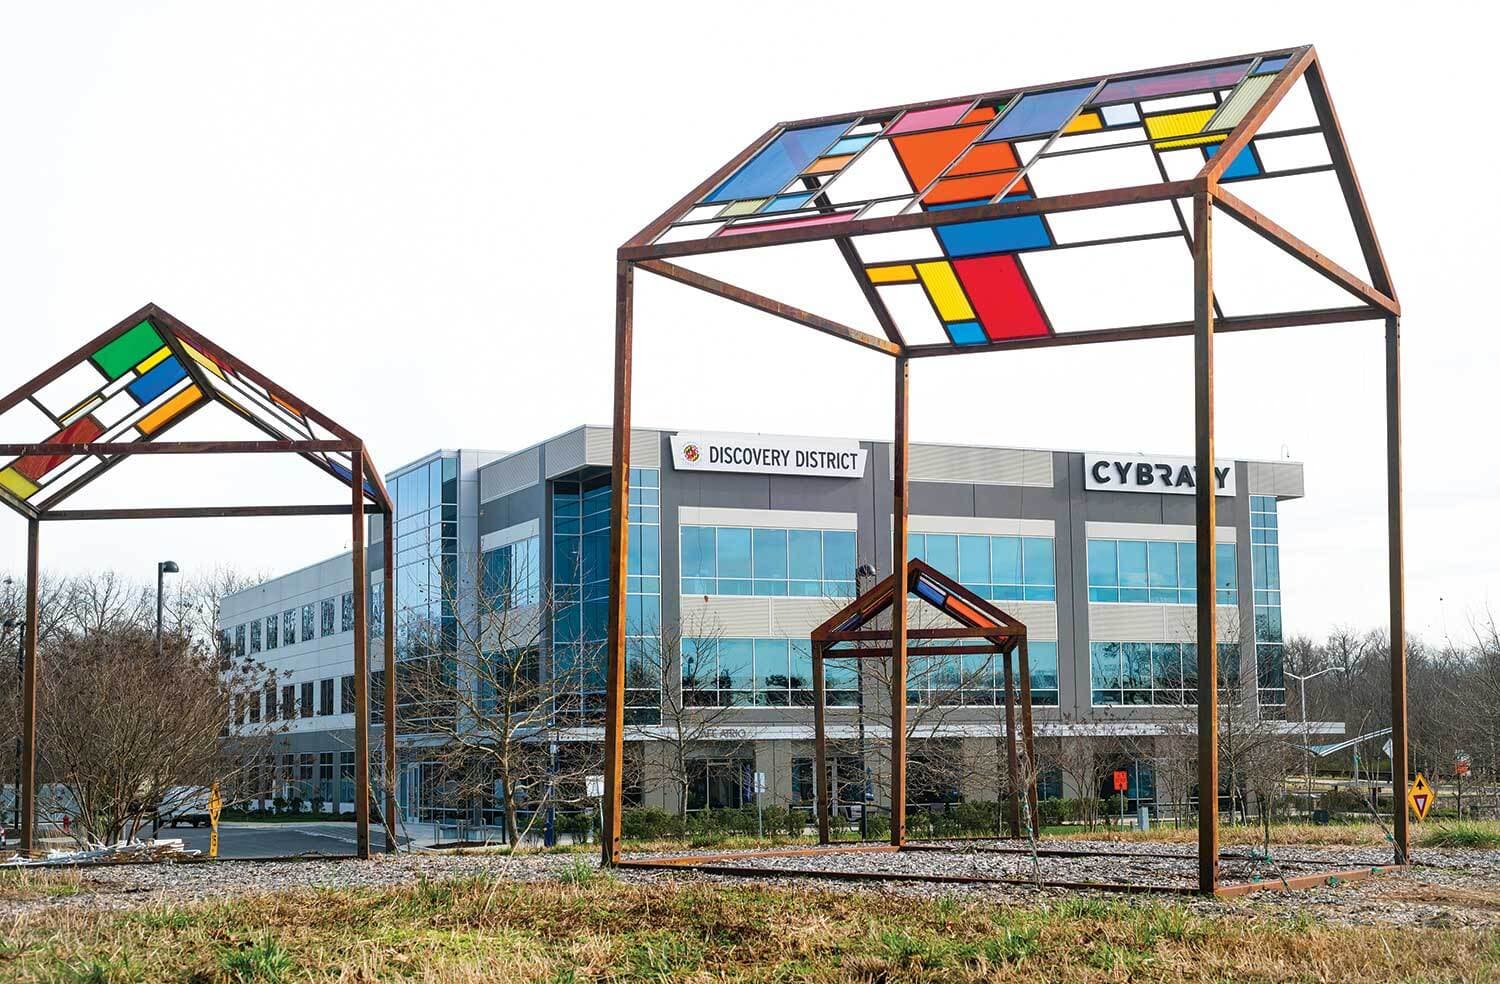 Several metal structures with clear glass on 3 sides and stained glass panels as the pitched roof. They stand outside in a grassy area.